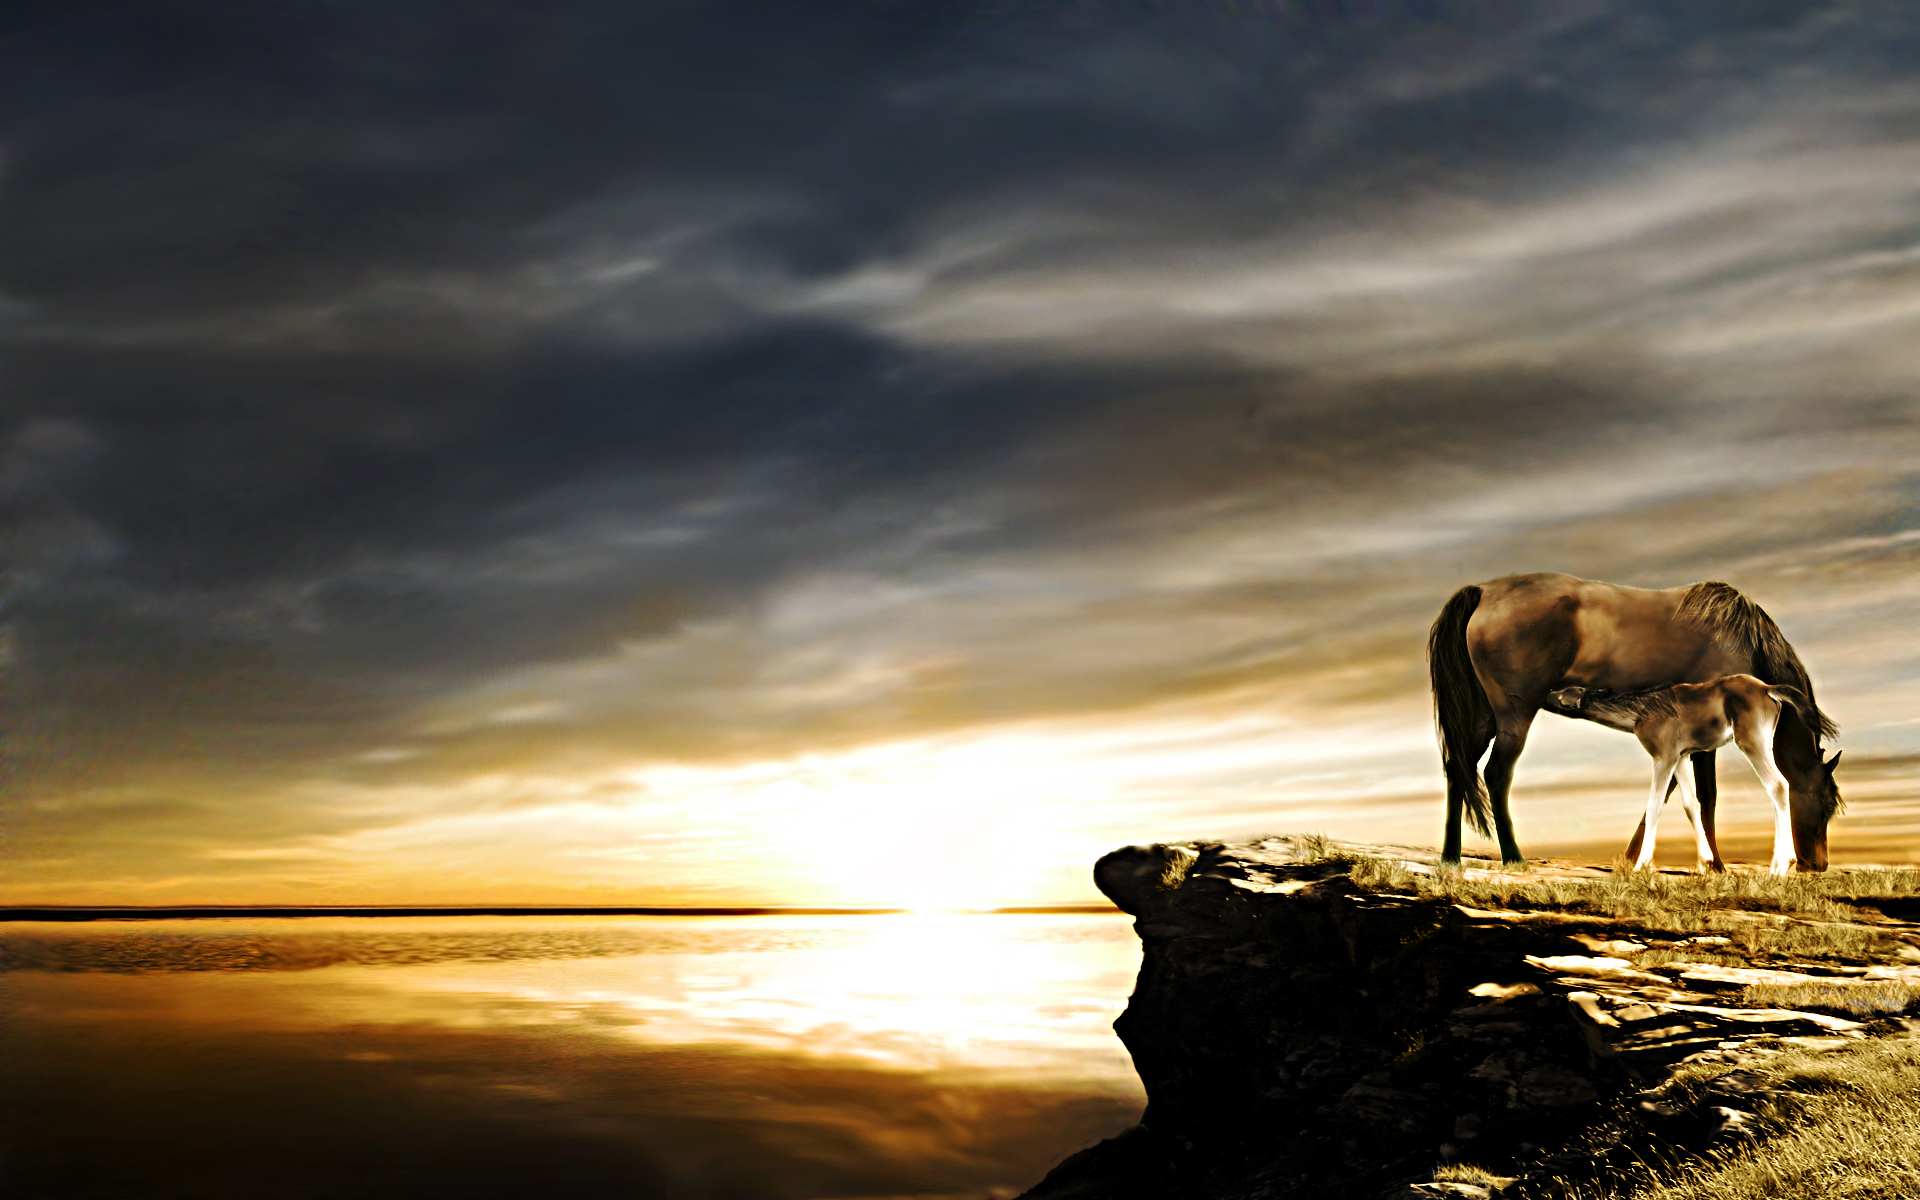 Pin Wild Horses Wallpaper In Desktop Background Category On